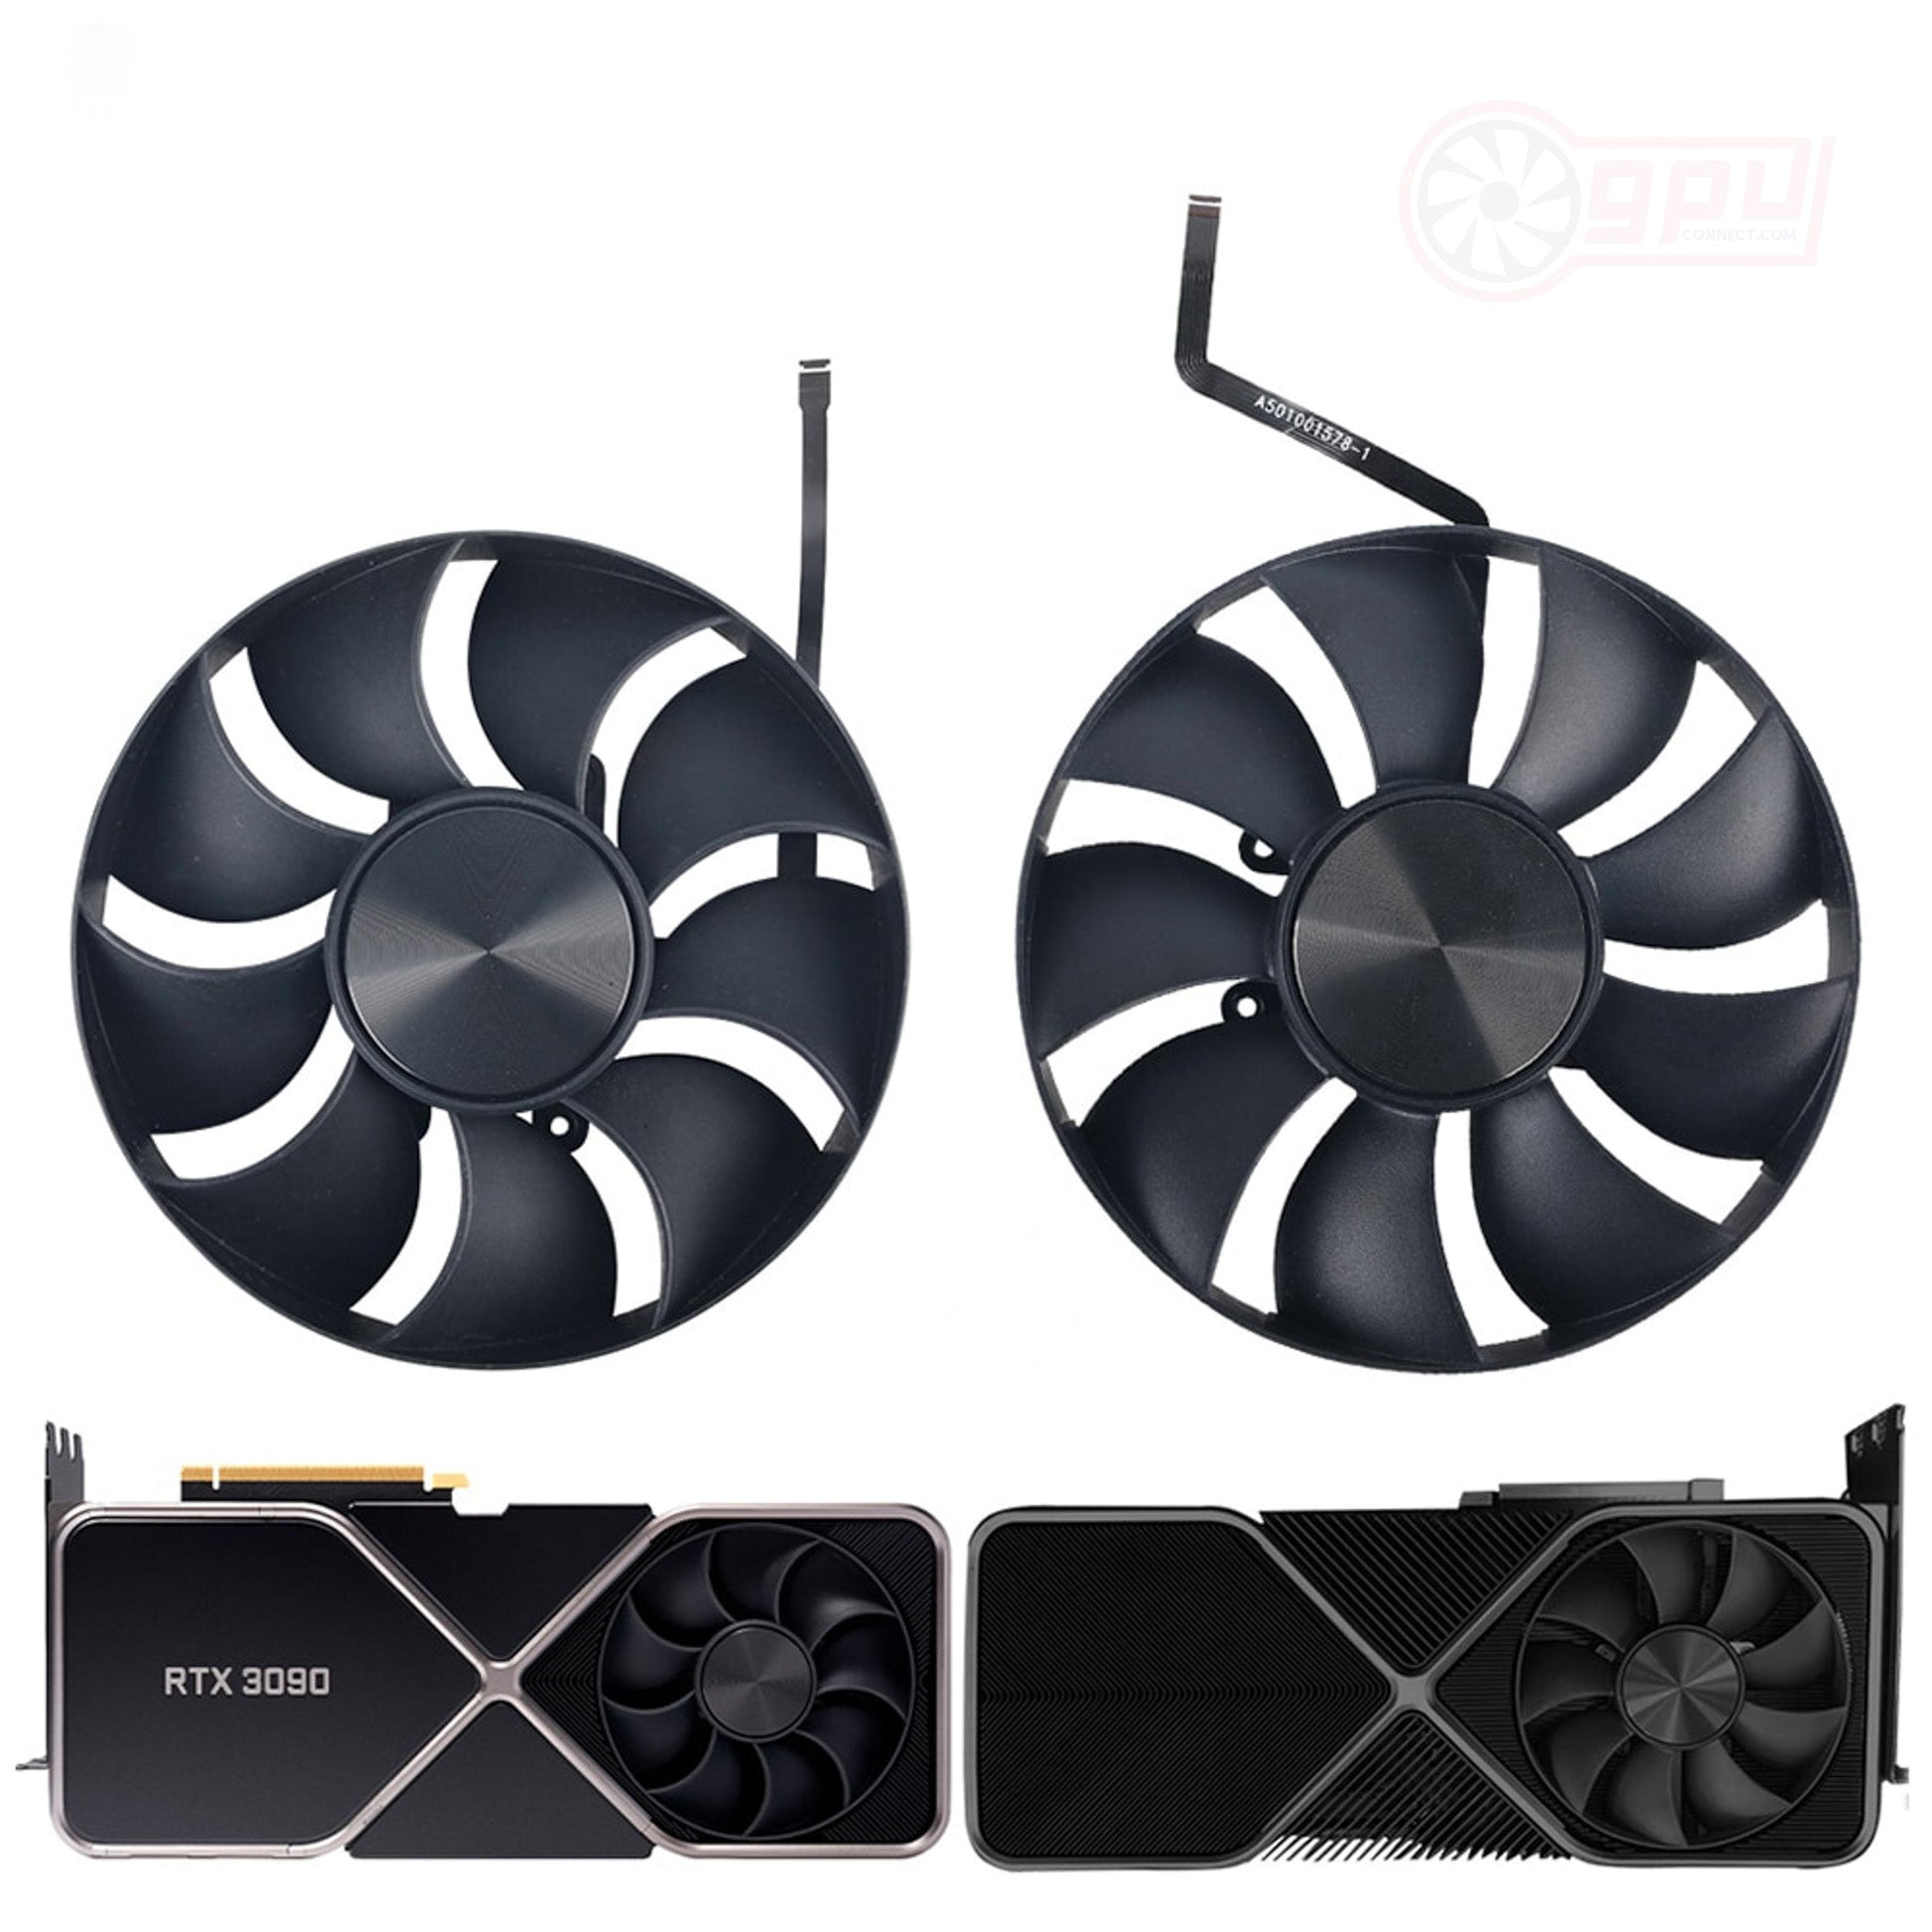 NVIDIA GeForce RTX 3090 3090 Ti Founders Edition FE Replacement Fans - GPUCONNECT.COM